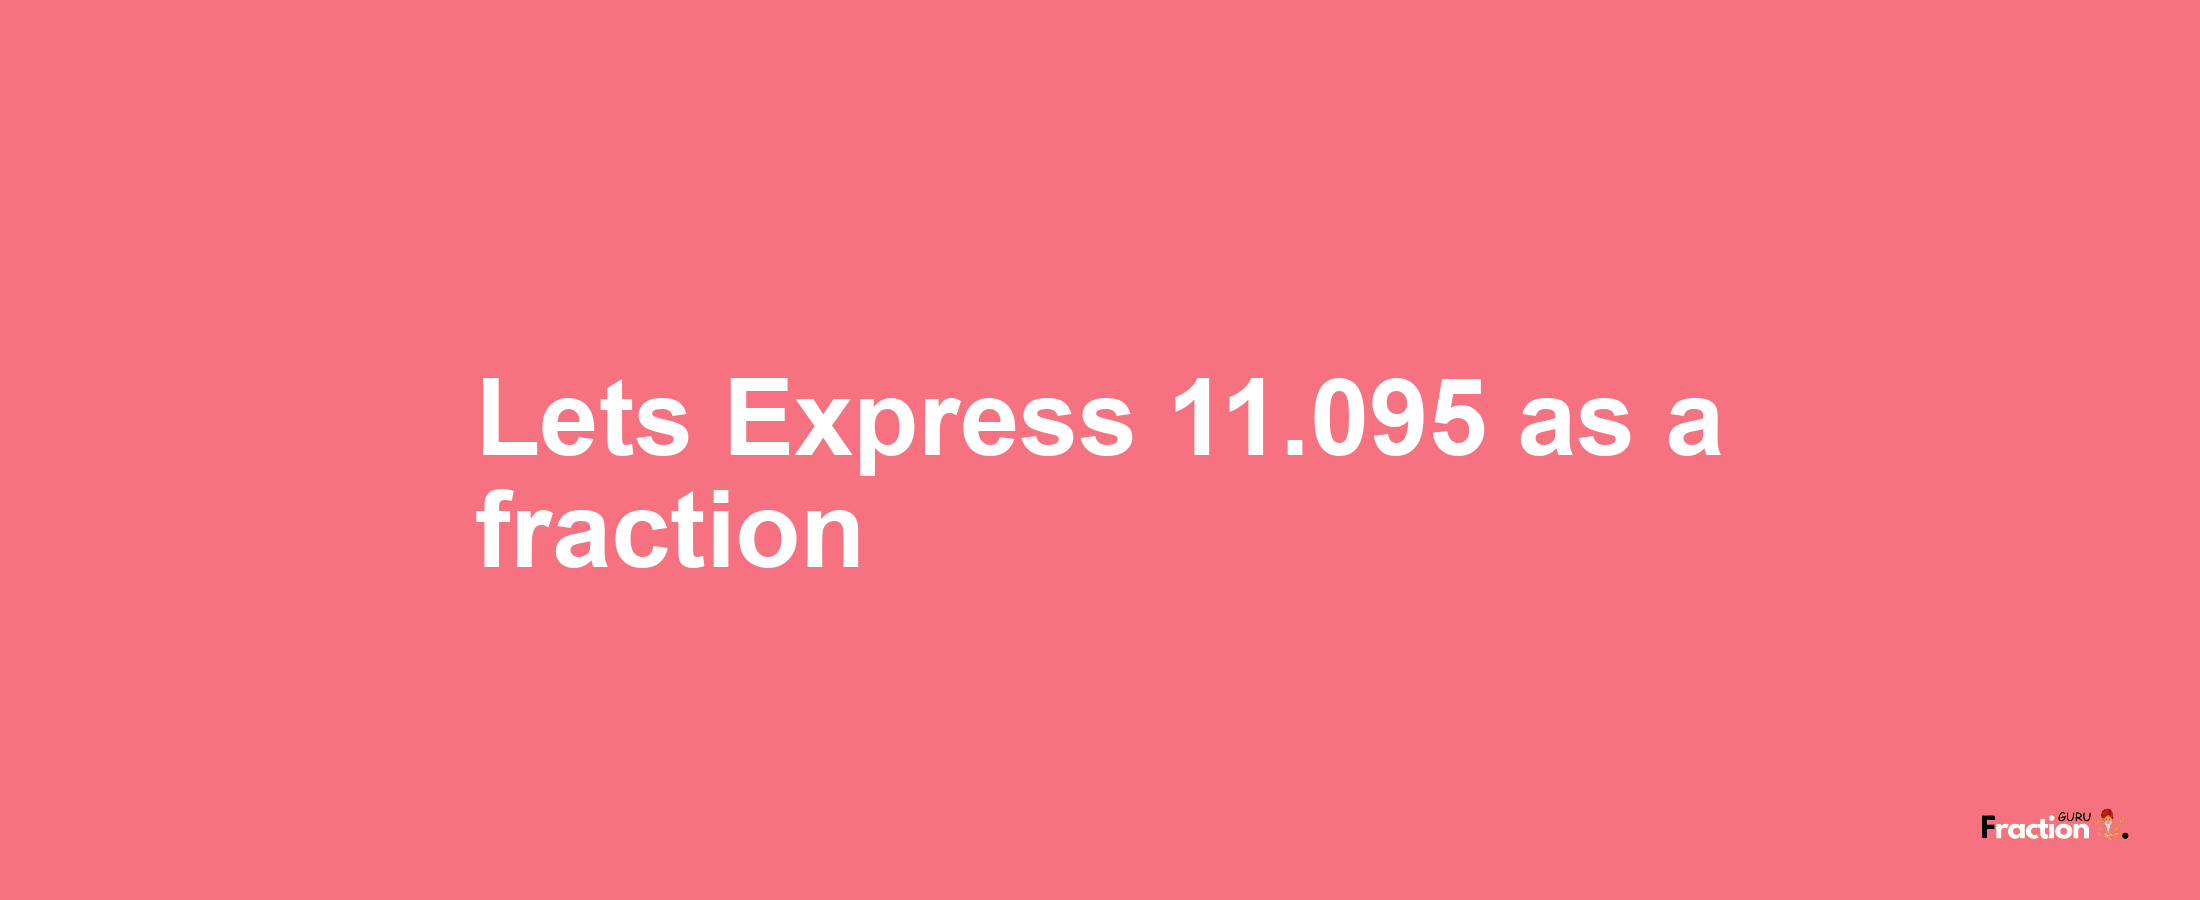 Lets Express 11.095 as afraction